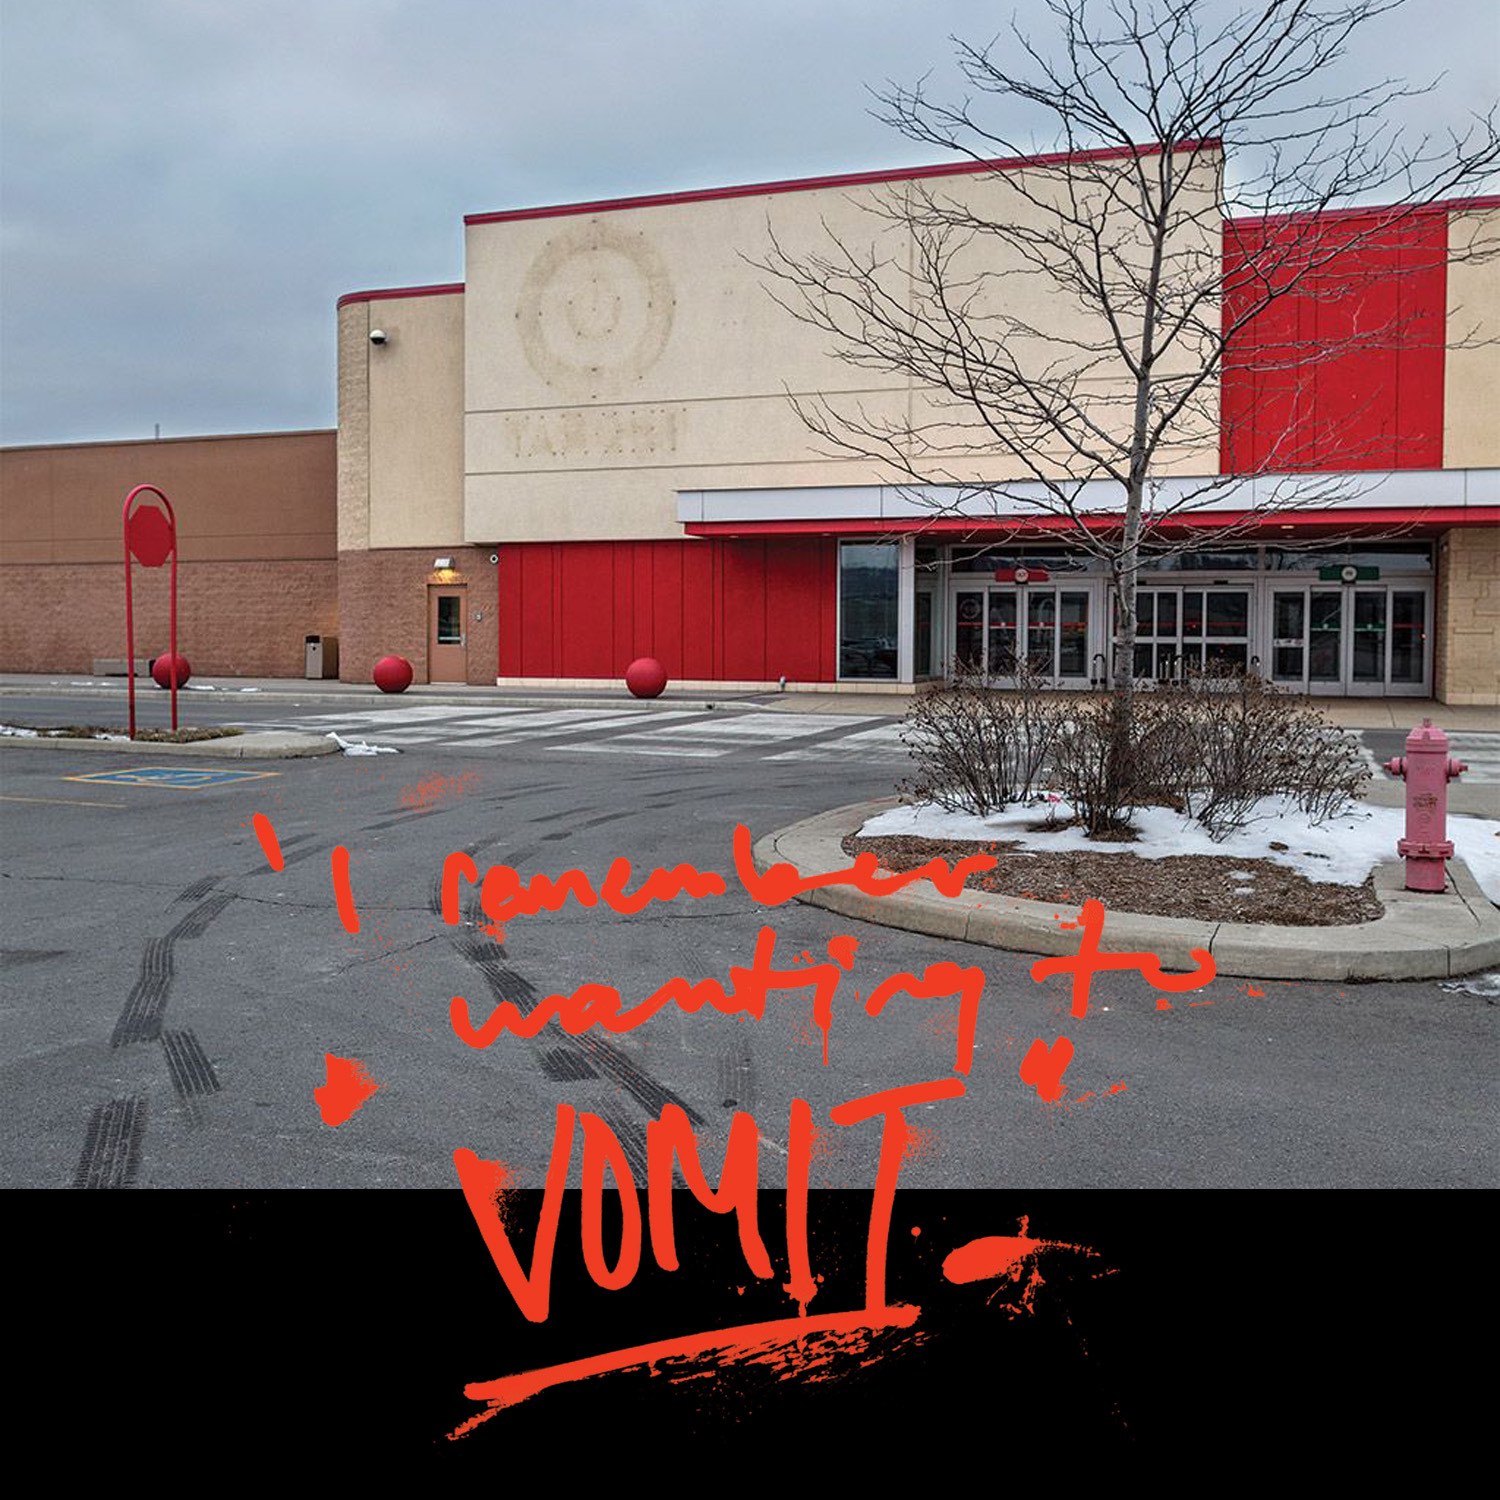 A shuttered Target store is seen in Canada after the company ended its operations in the country in 2015.